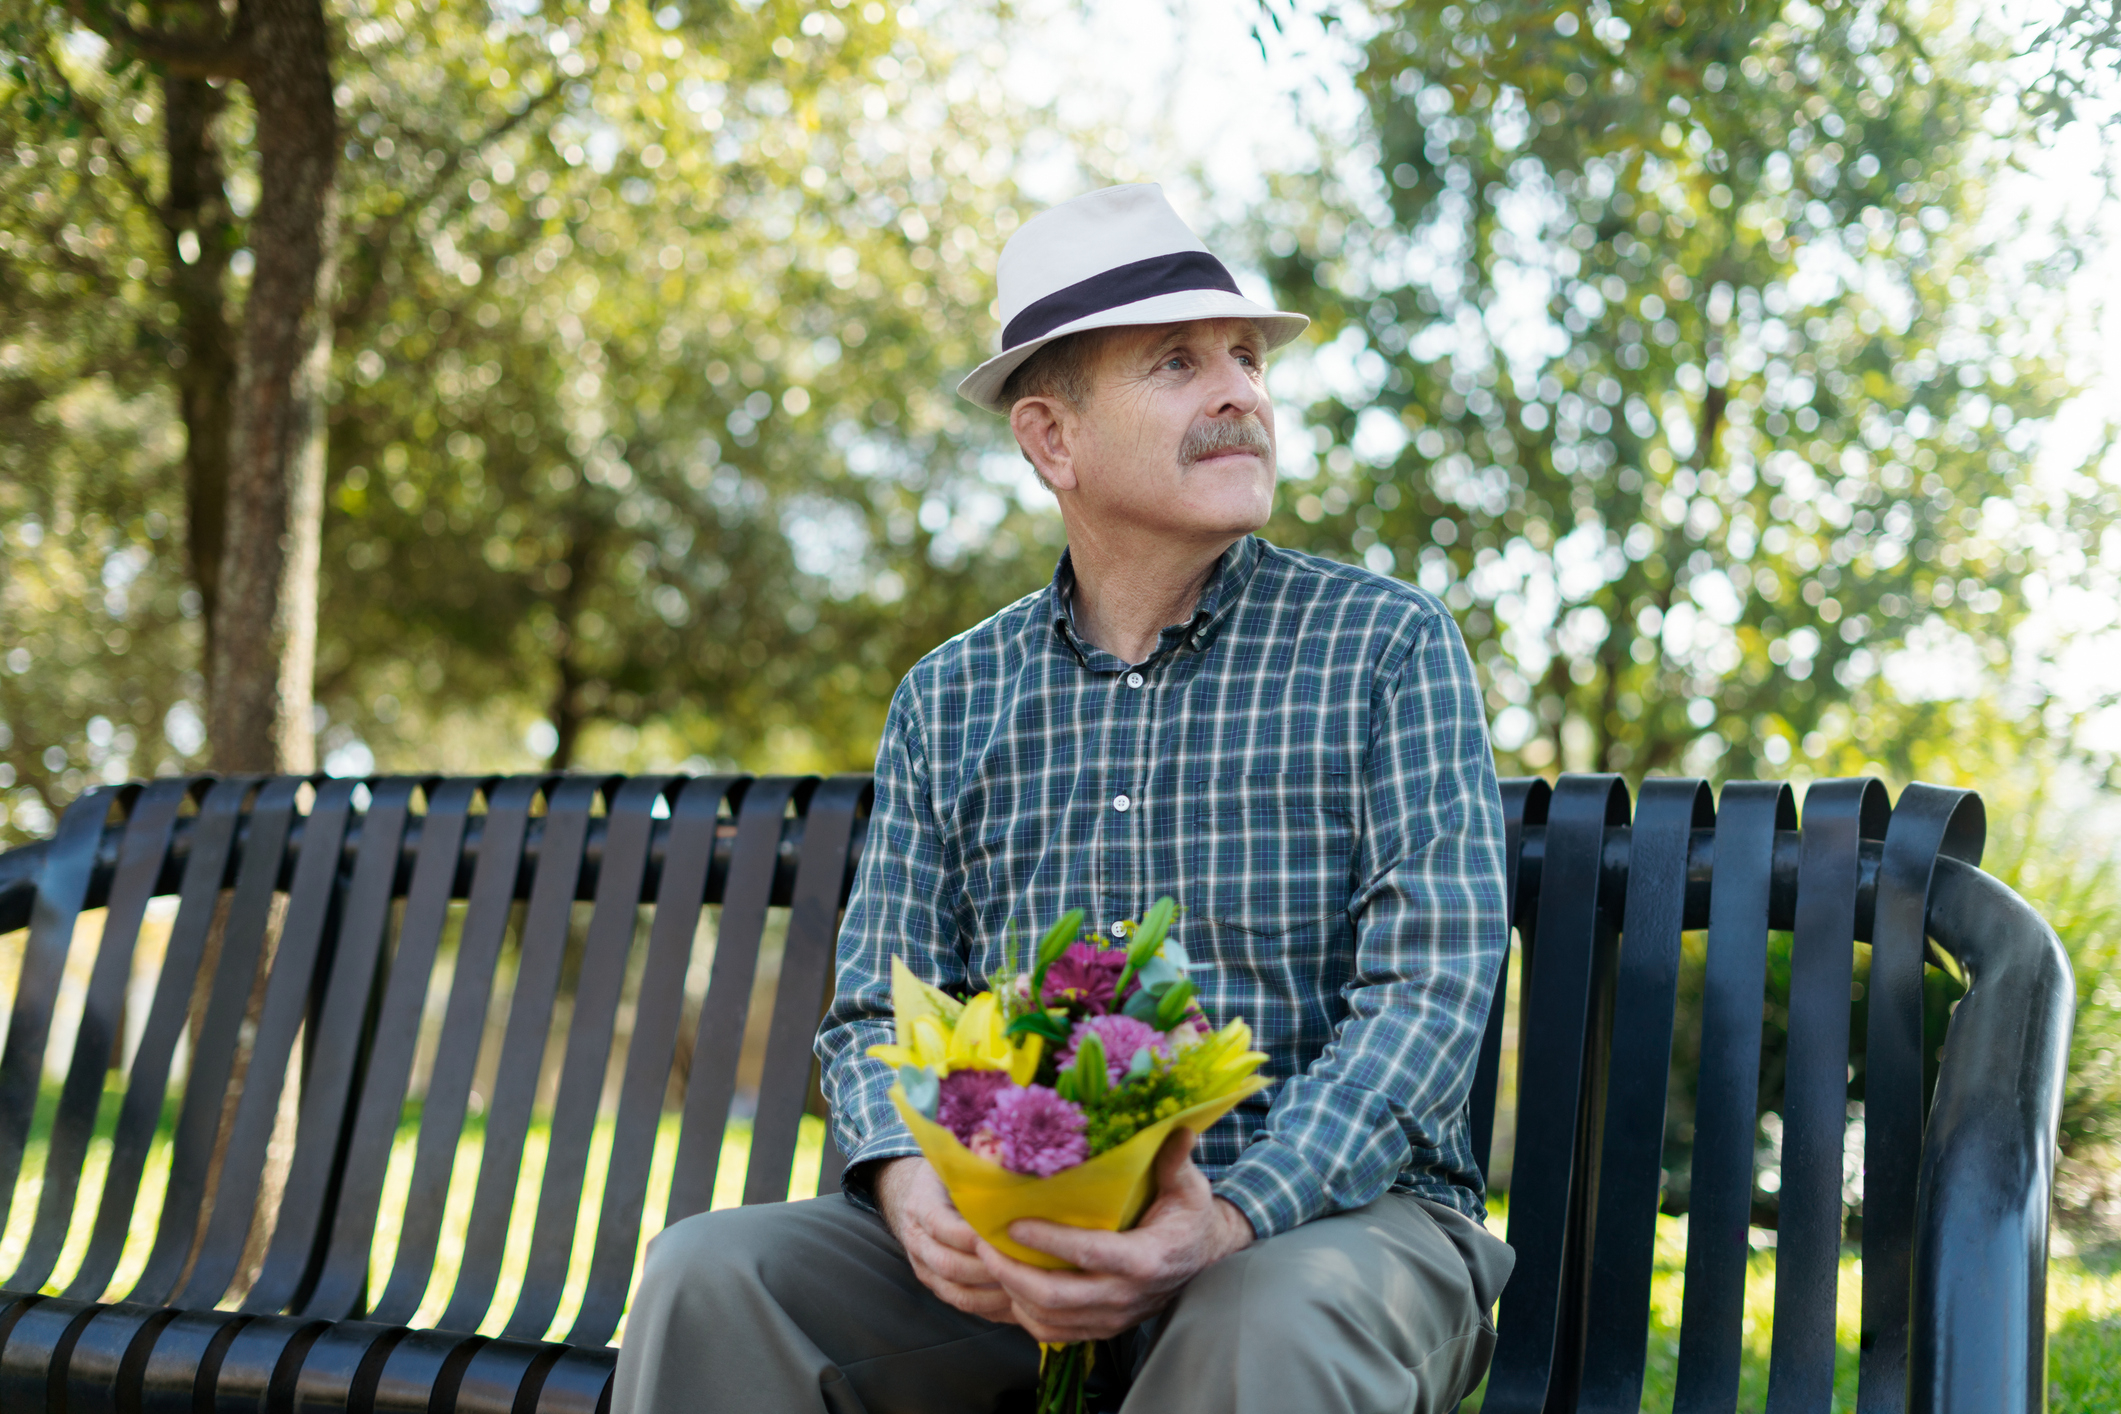 Elderly man seated on park bench holding bouquet, looking hopeful